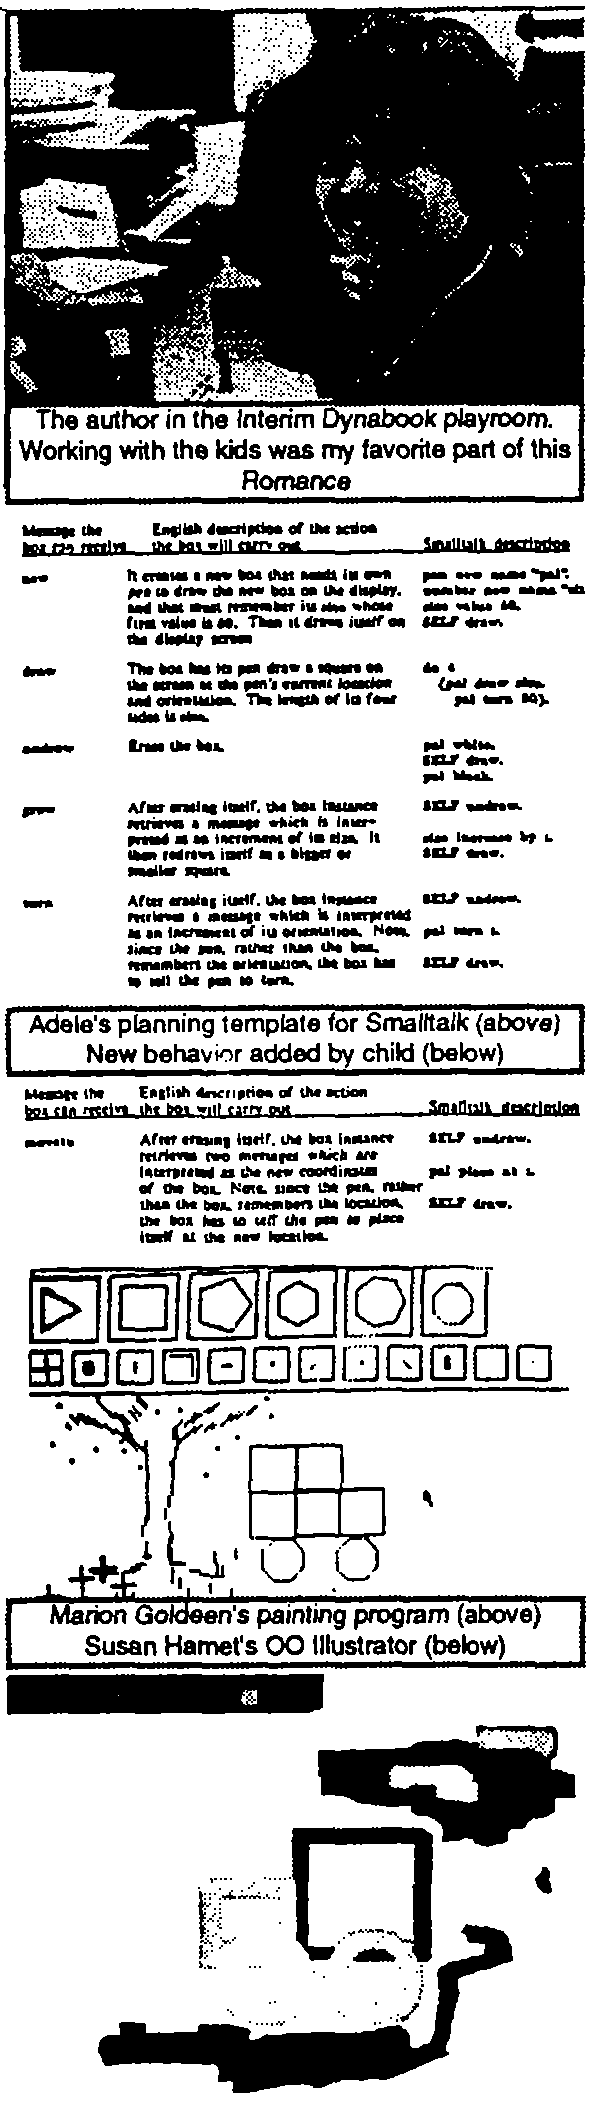 The author in the interim Dynabook playroom, Adele's planning template for Smalltalk (above) New behavior added by child (below), Marion Goldeen's painting program (above) Susan Hamel's OO Illustrator (below)